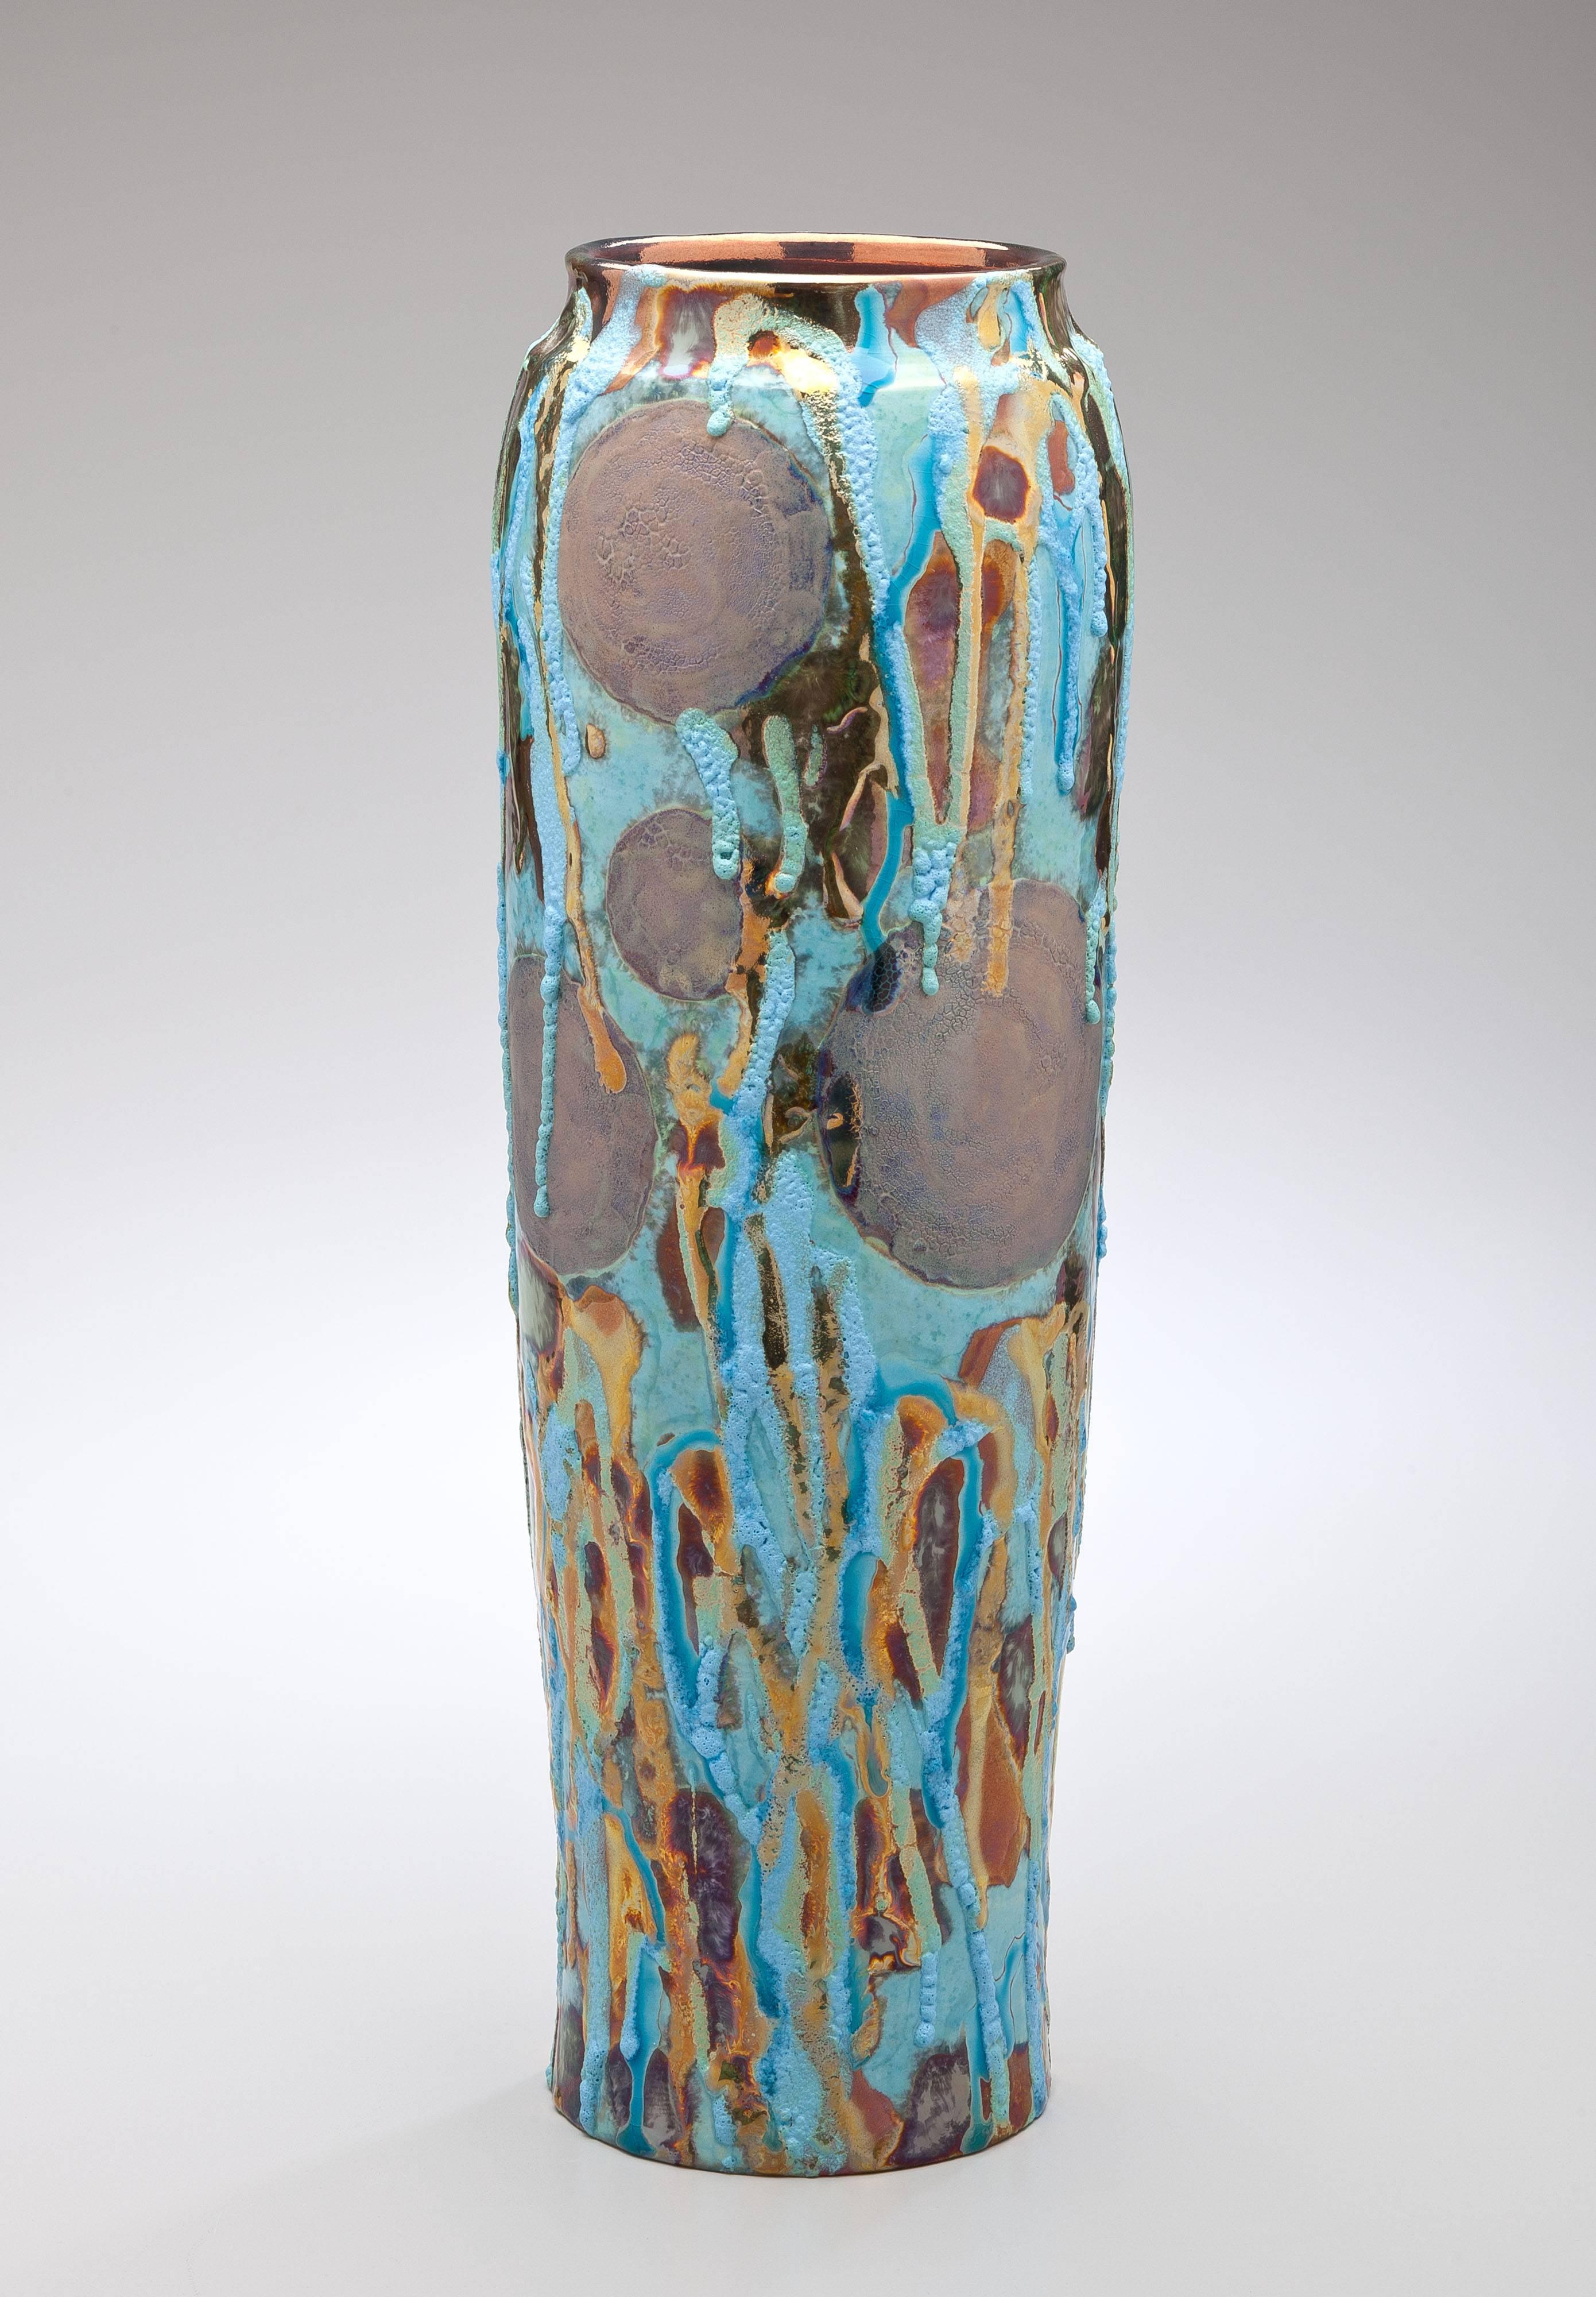 A large pottery vase by Paul Katrich with a luster glaze in blue and bronze. Katrich, a contemporary potter who works in Michigan, is noted for his luster glazes in stunning colors and combinations giving his works a sense of inner light. Katrich